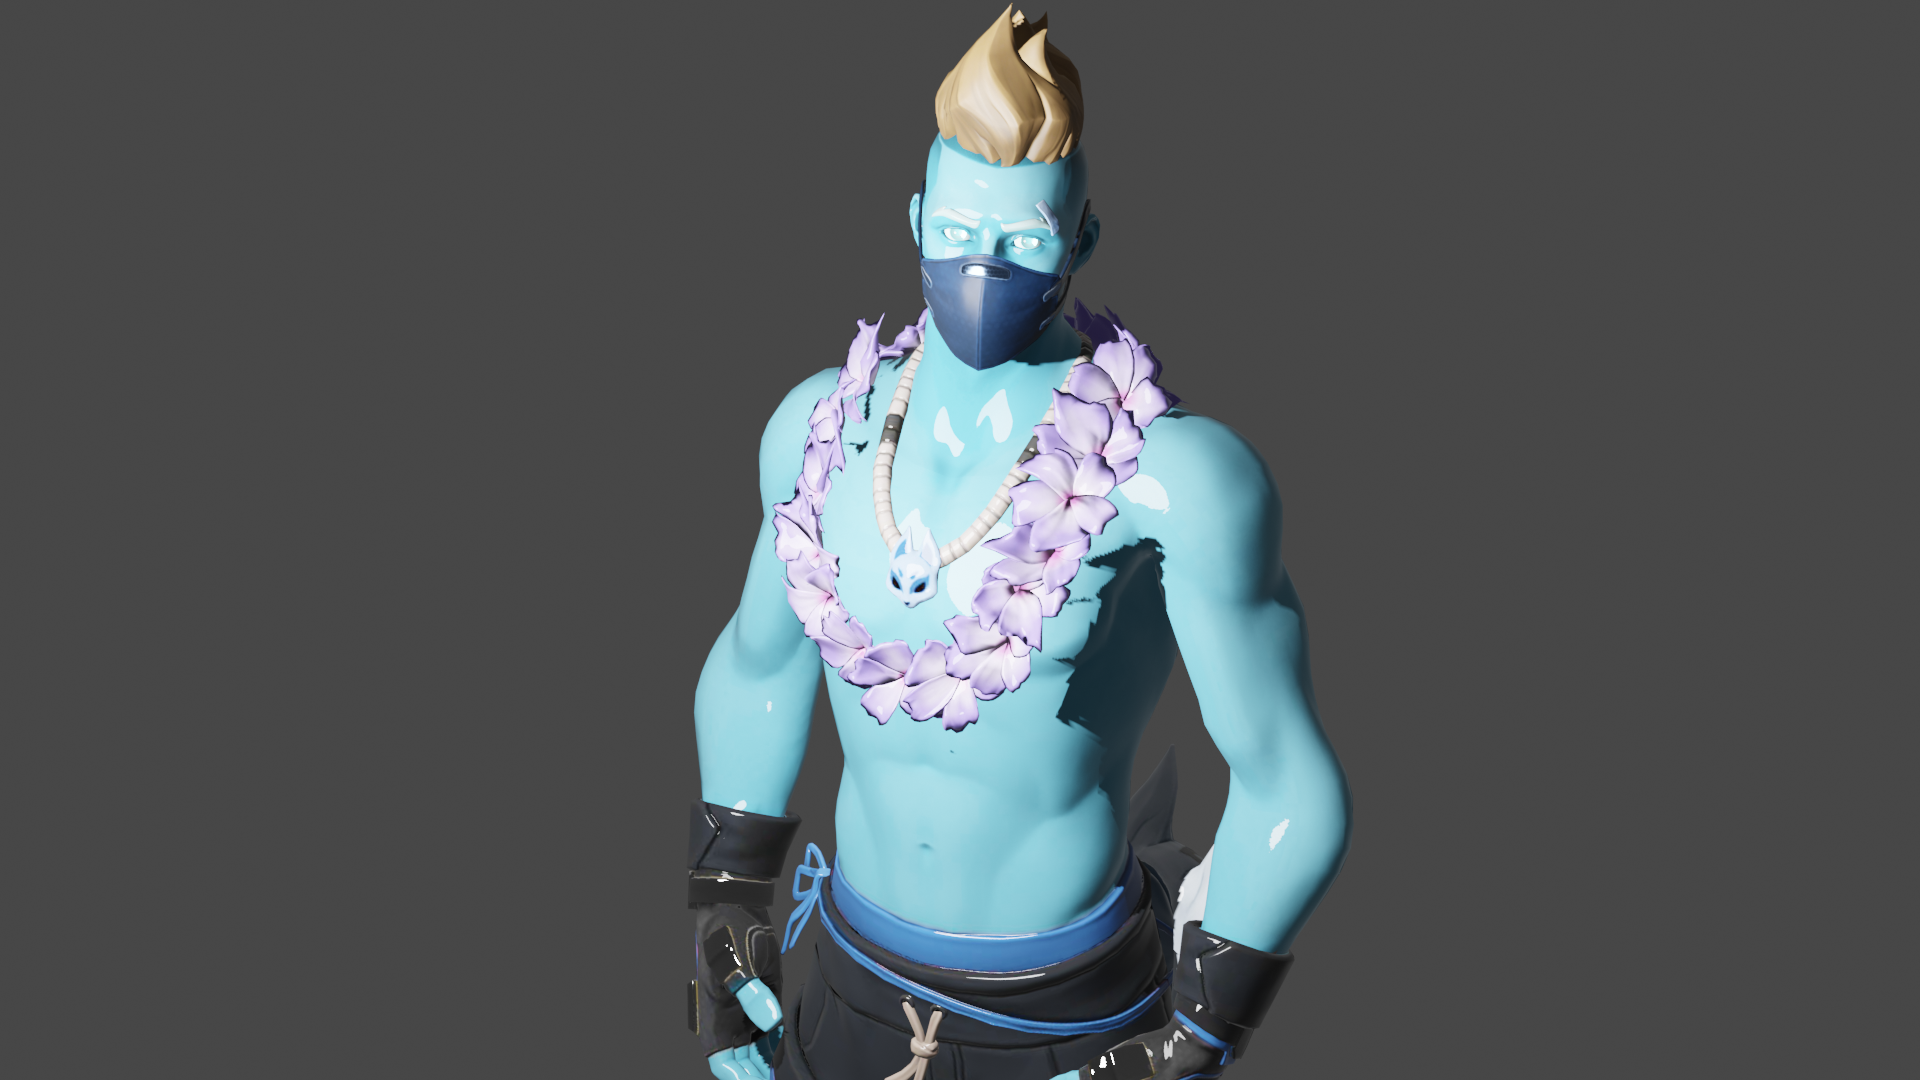 I'm learning how to use blender for fortnite skins. I decided to do a summer drift with a water body, not the best but i'm still learning. I couldn't find the hair